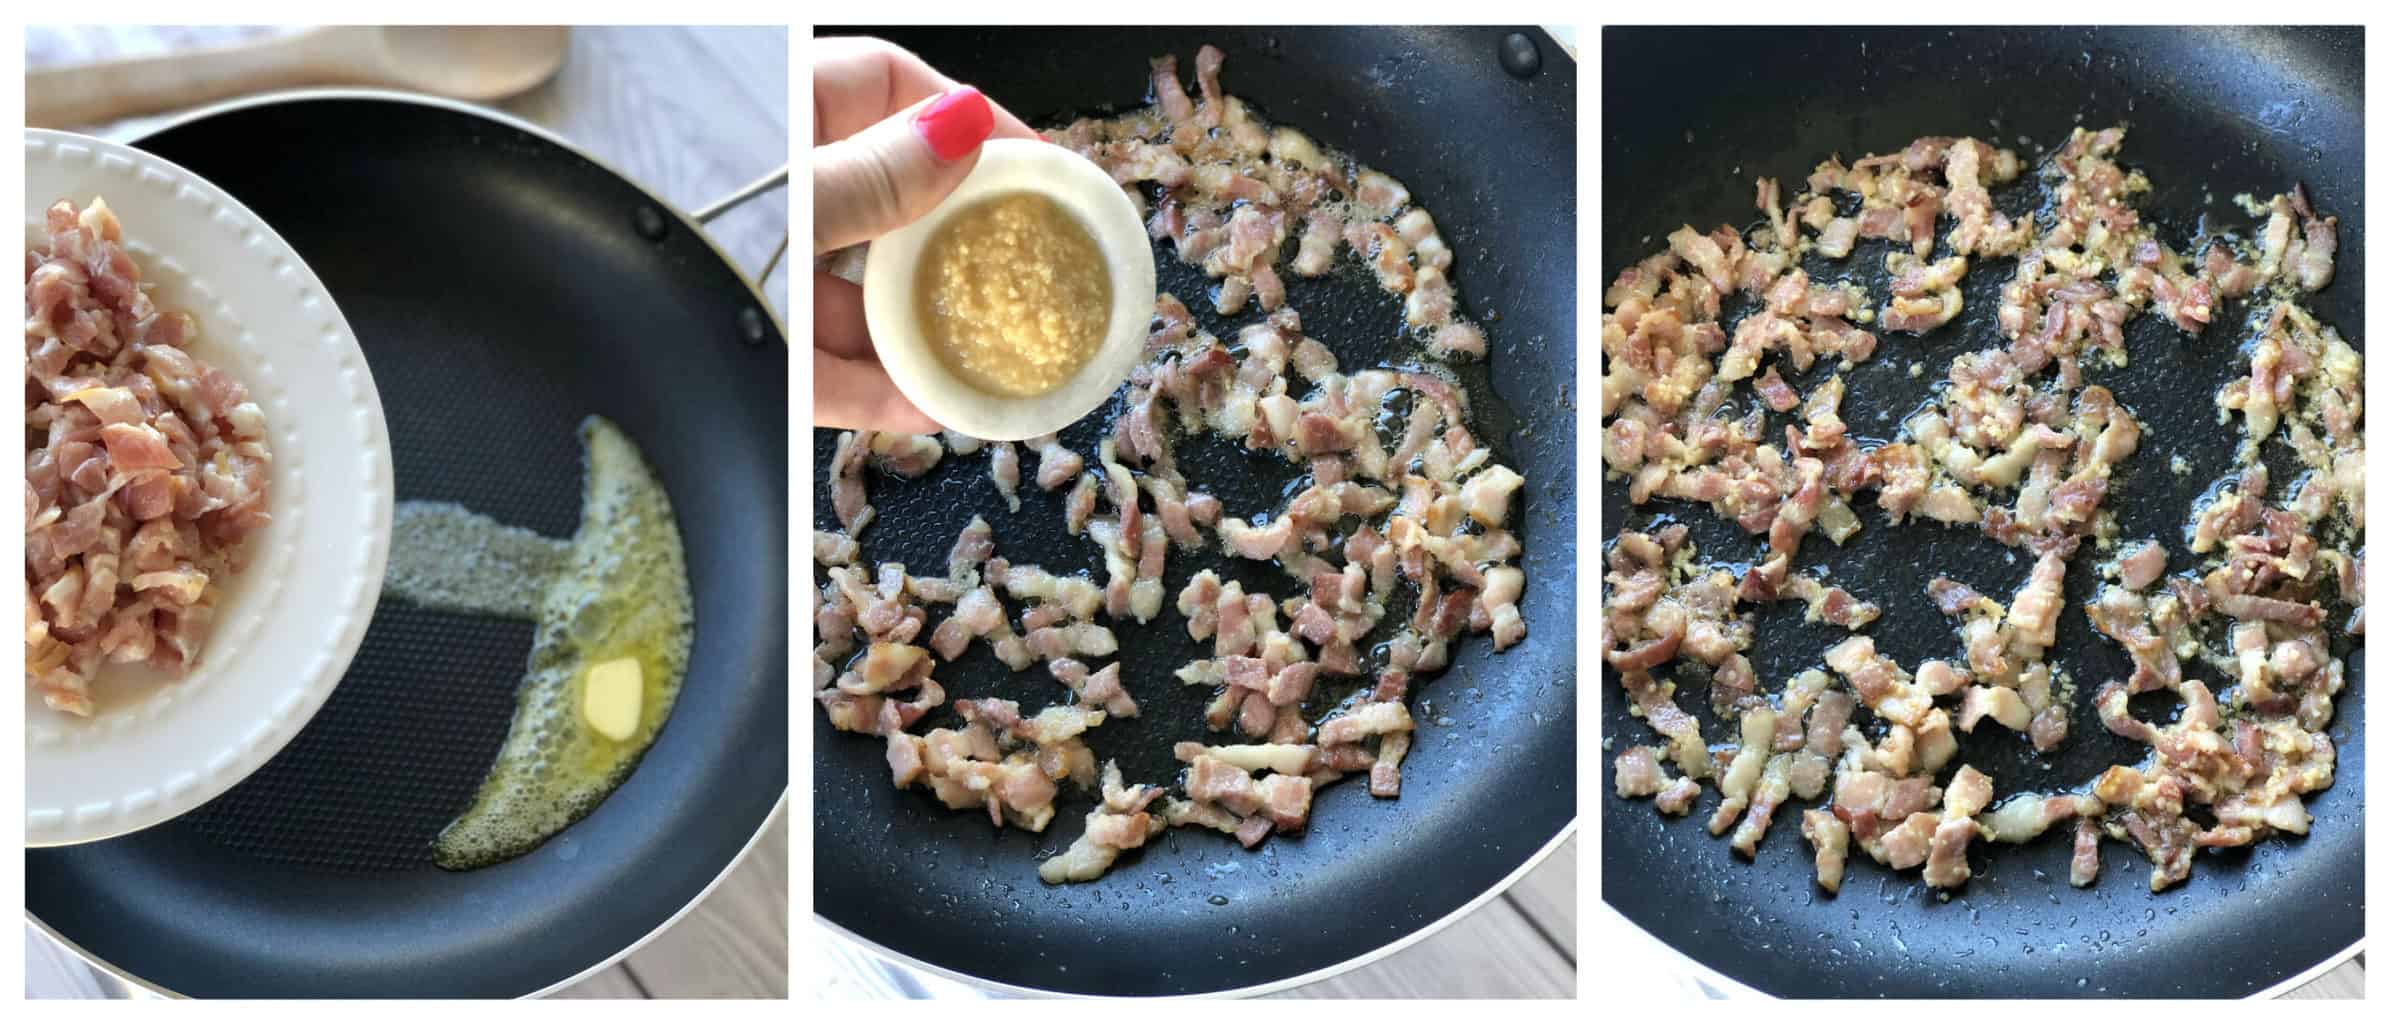 Panfry the bacon until crispy and add garlic 